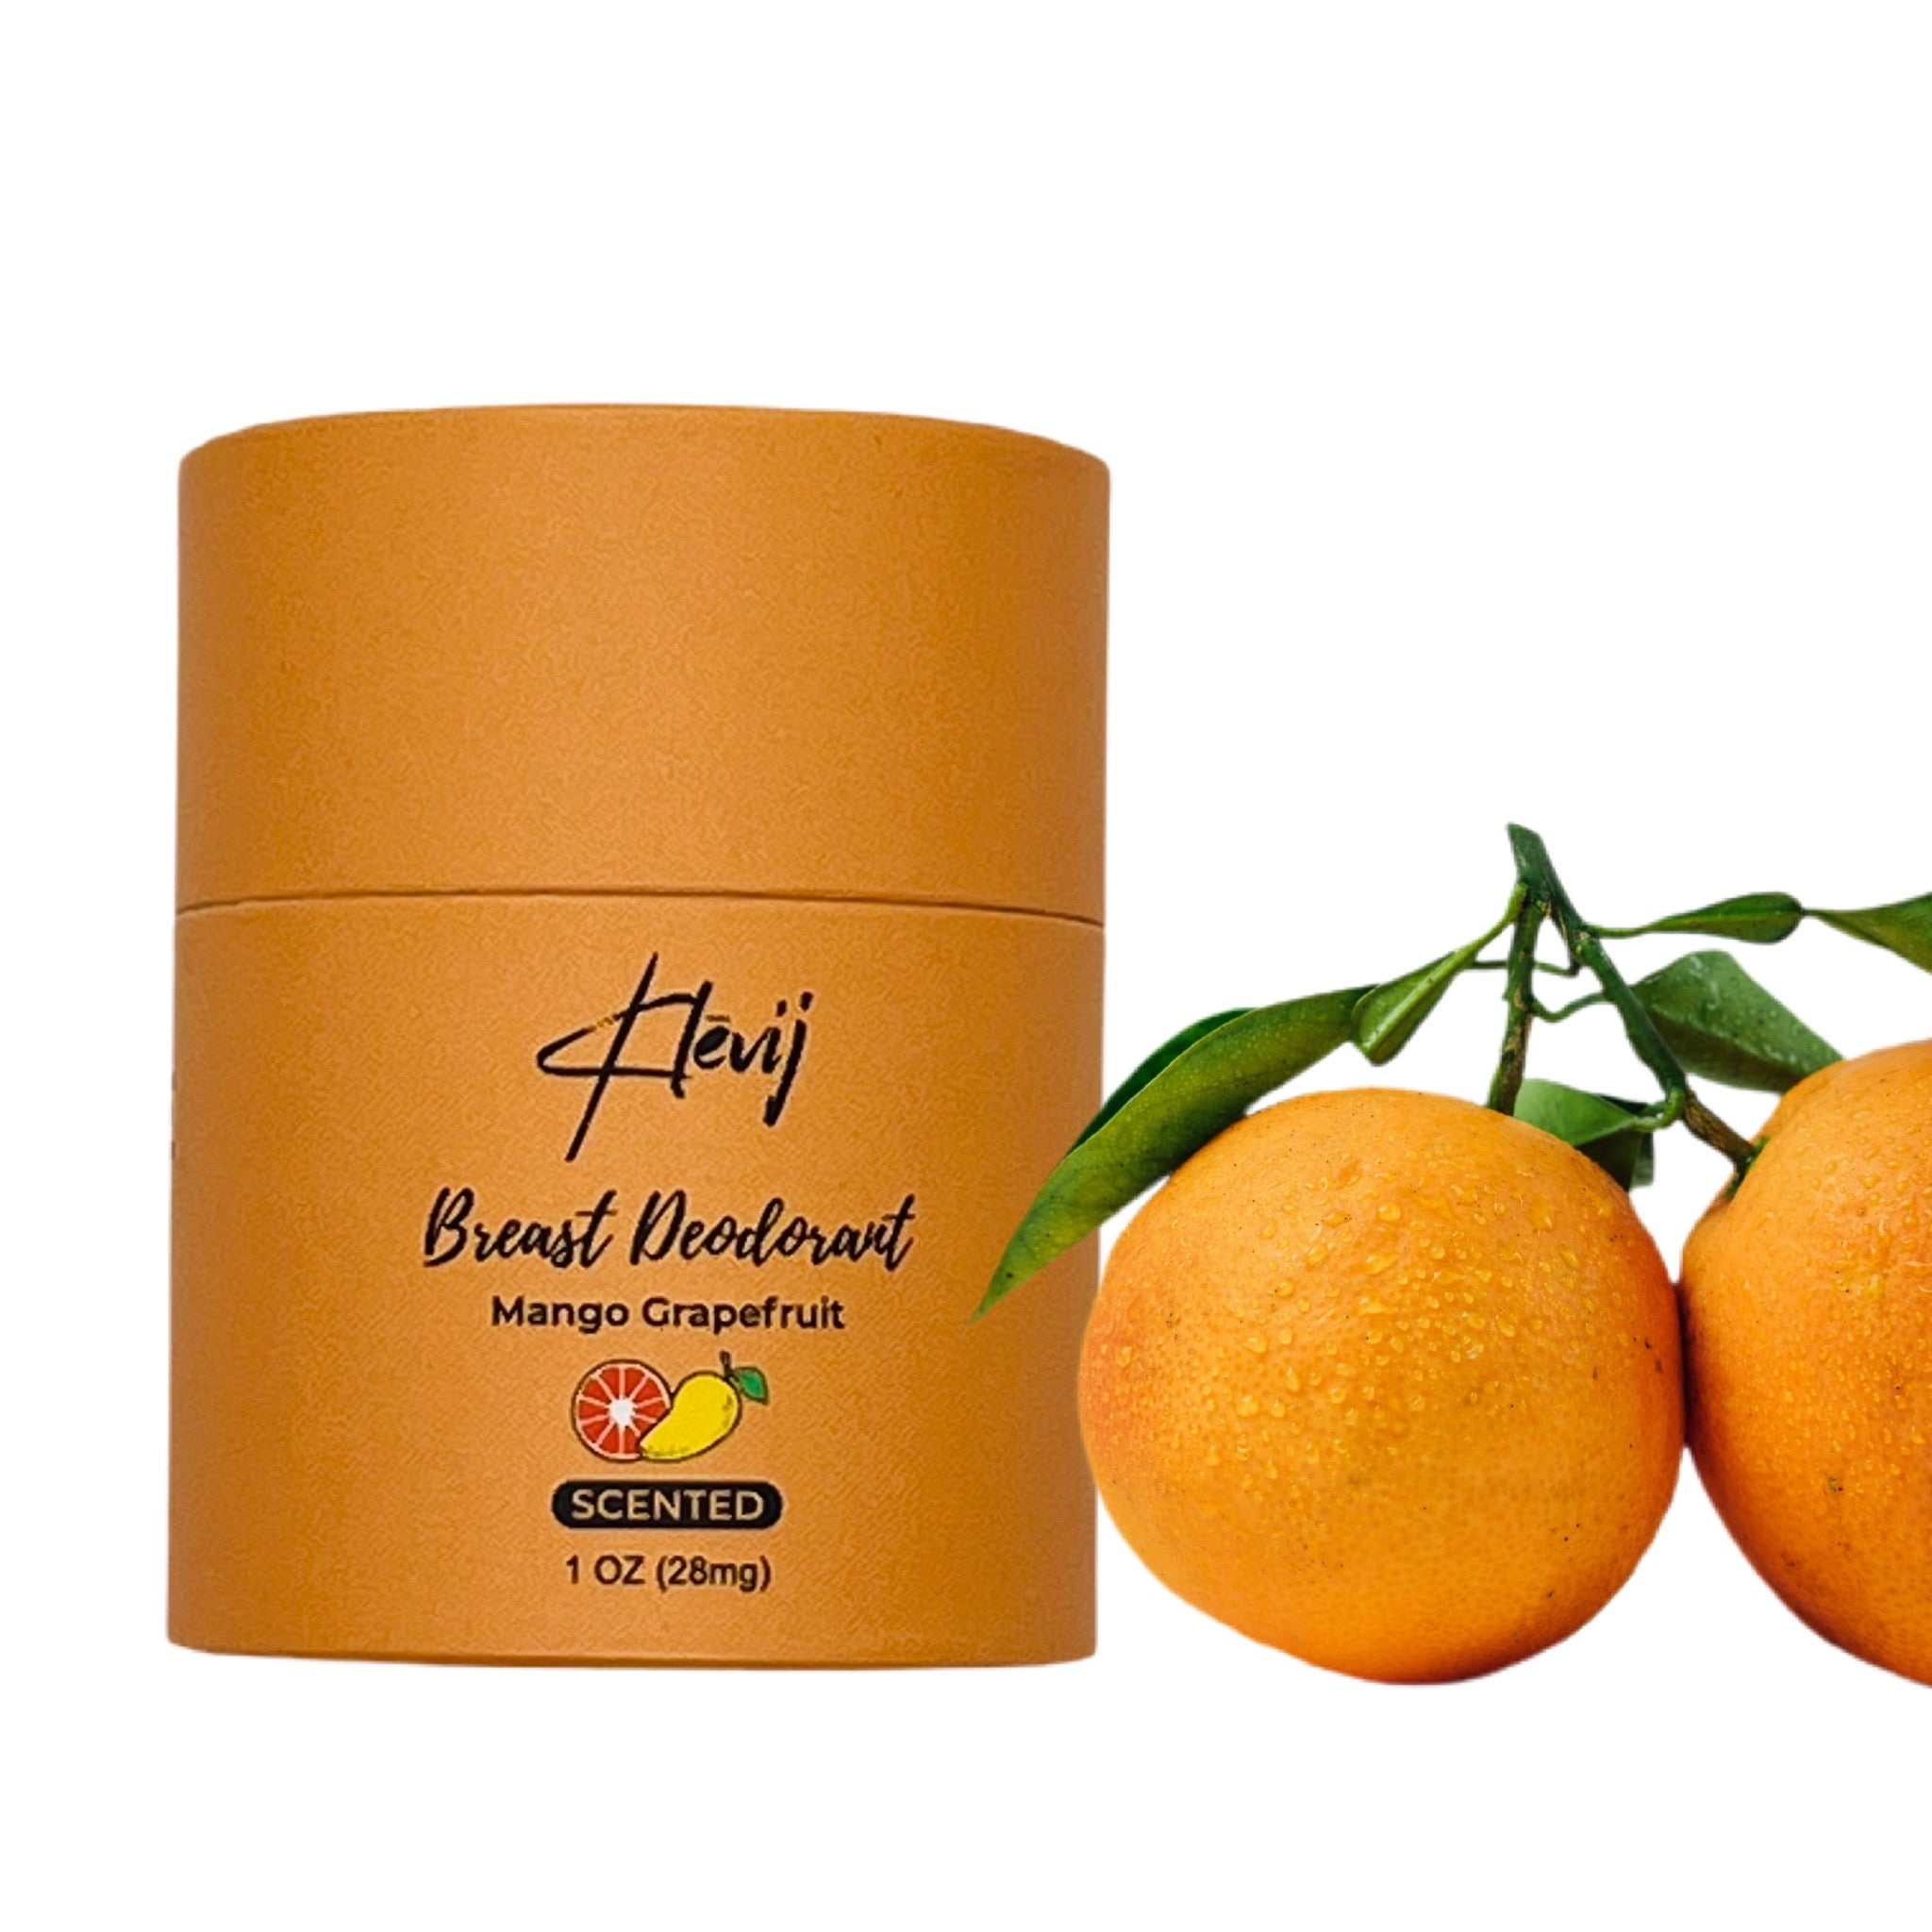 Breast Deodorant by Klevij | 1 oz Mango Grapefruit Scented | Refreshing Protection for All-Day Confidence